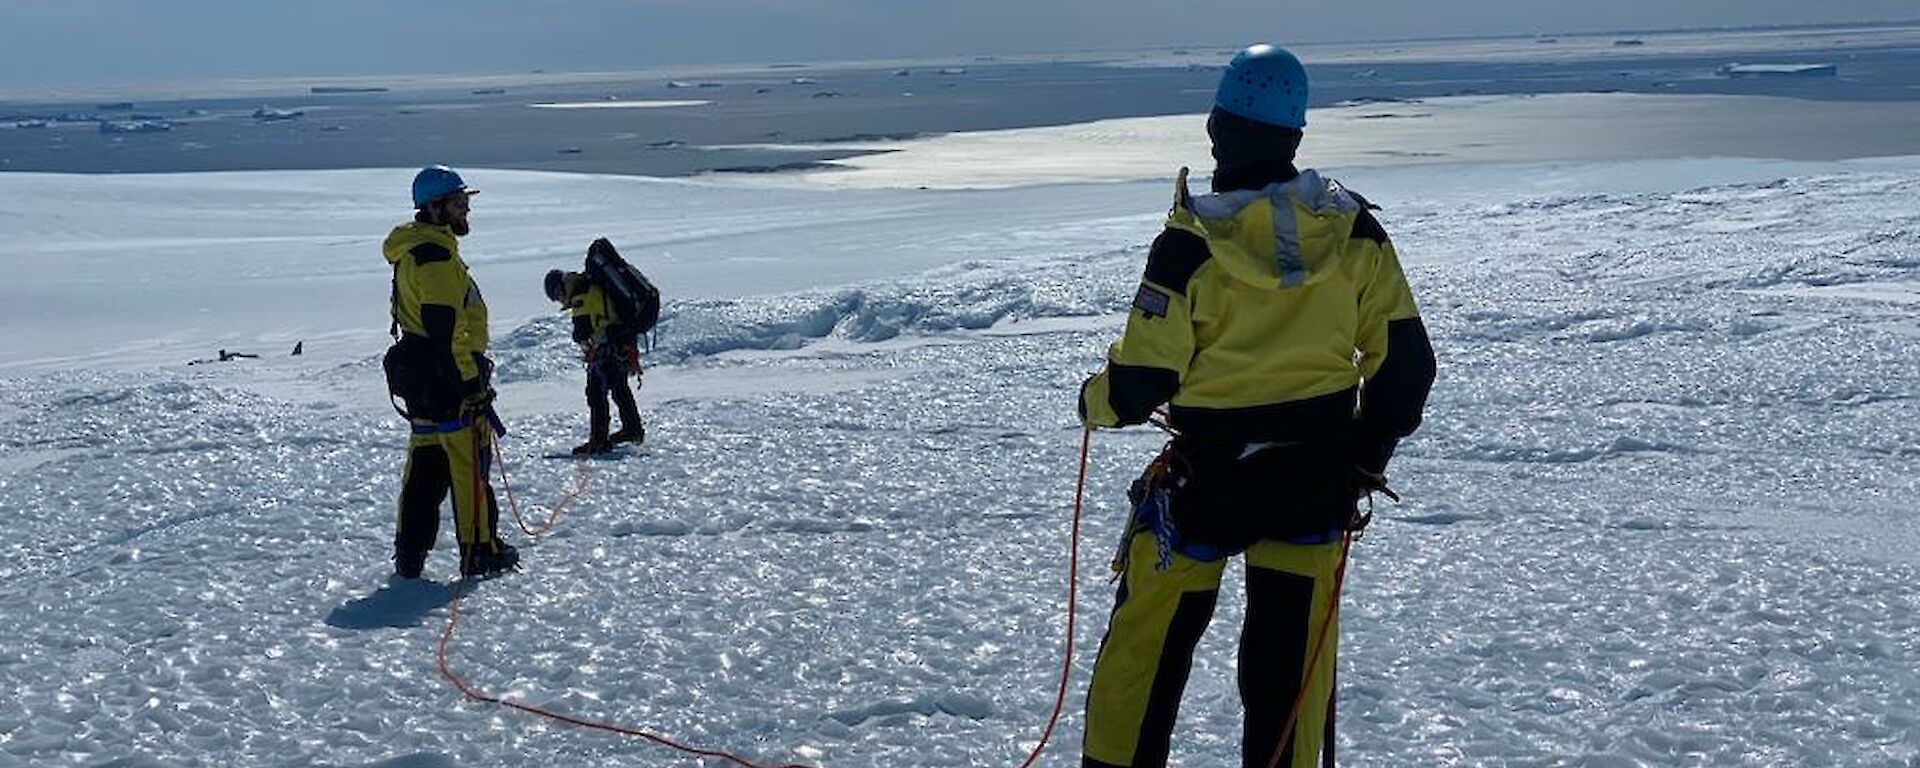 Three men wearing harness and helmets with ropes connecting them walk across icy landscape, sea in the distance